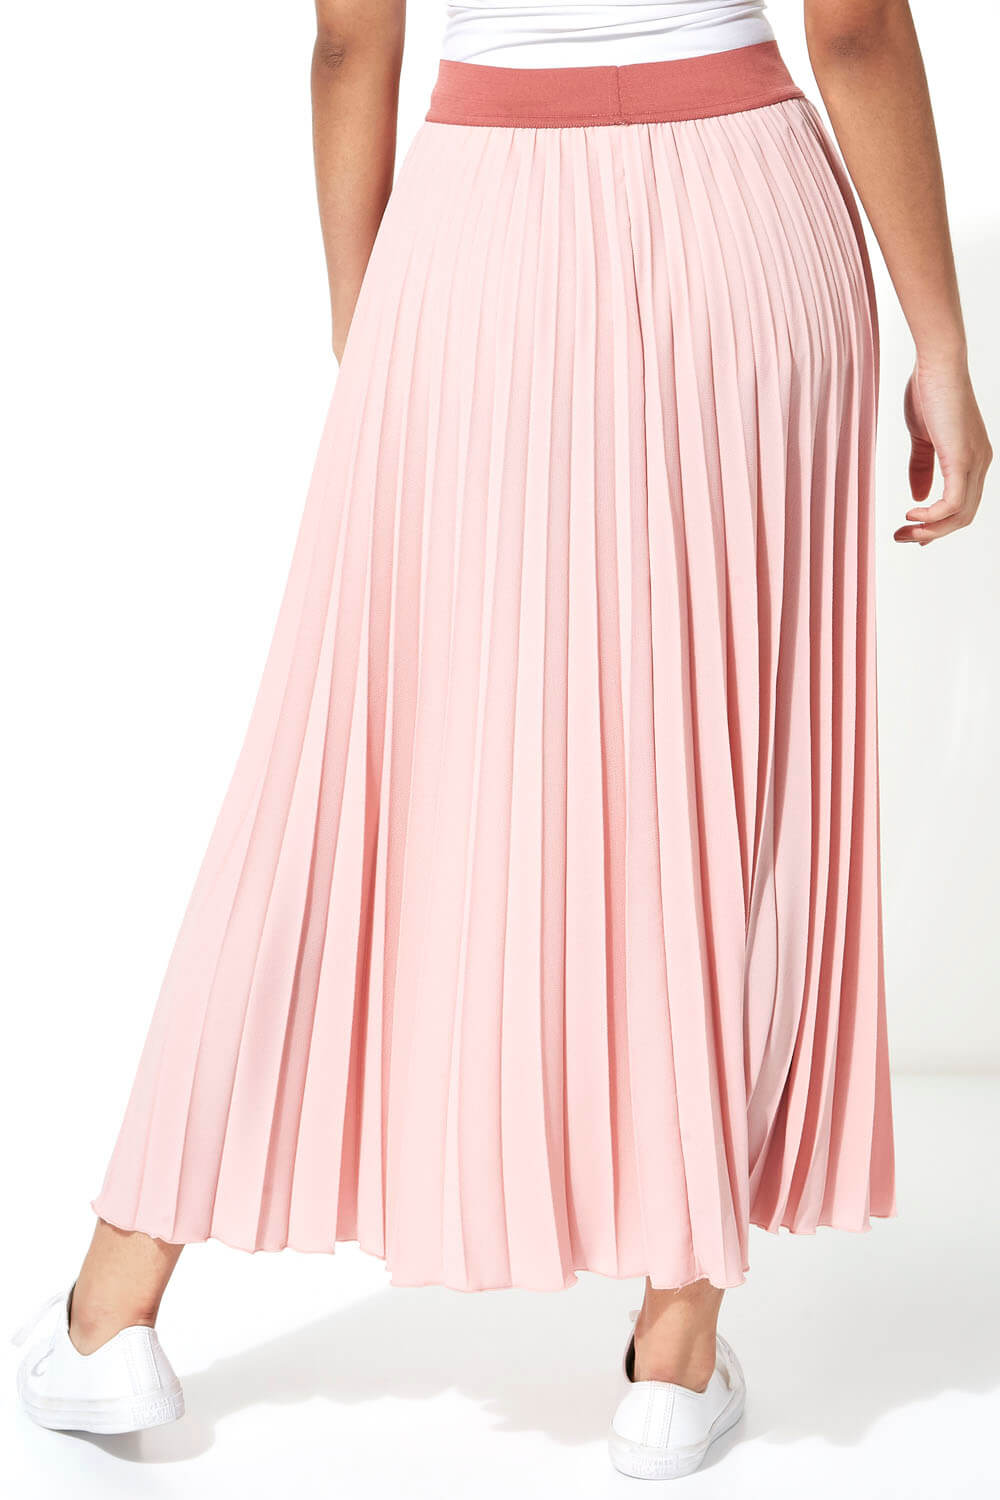 Light Pink Contrast Band Pleated Maxi Skirt, Image 2 of 5